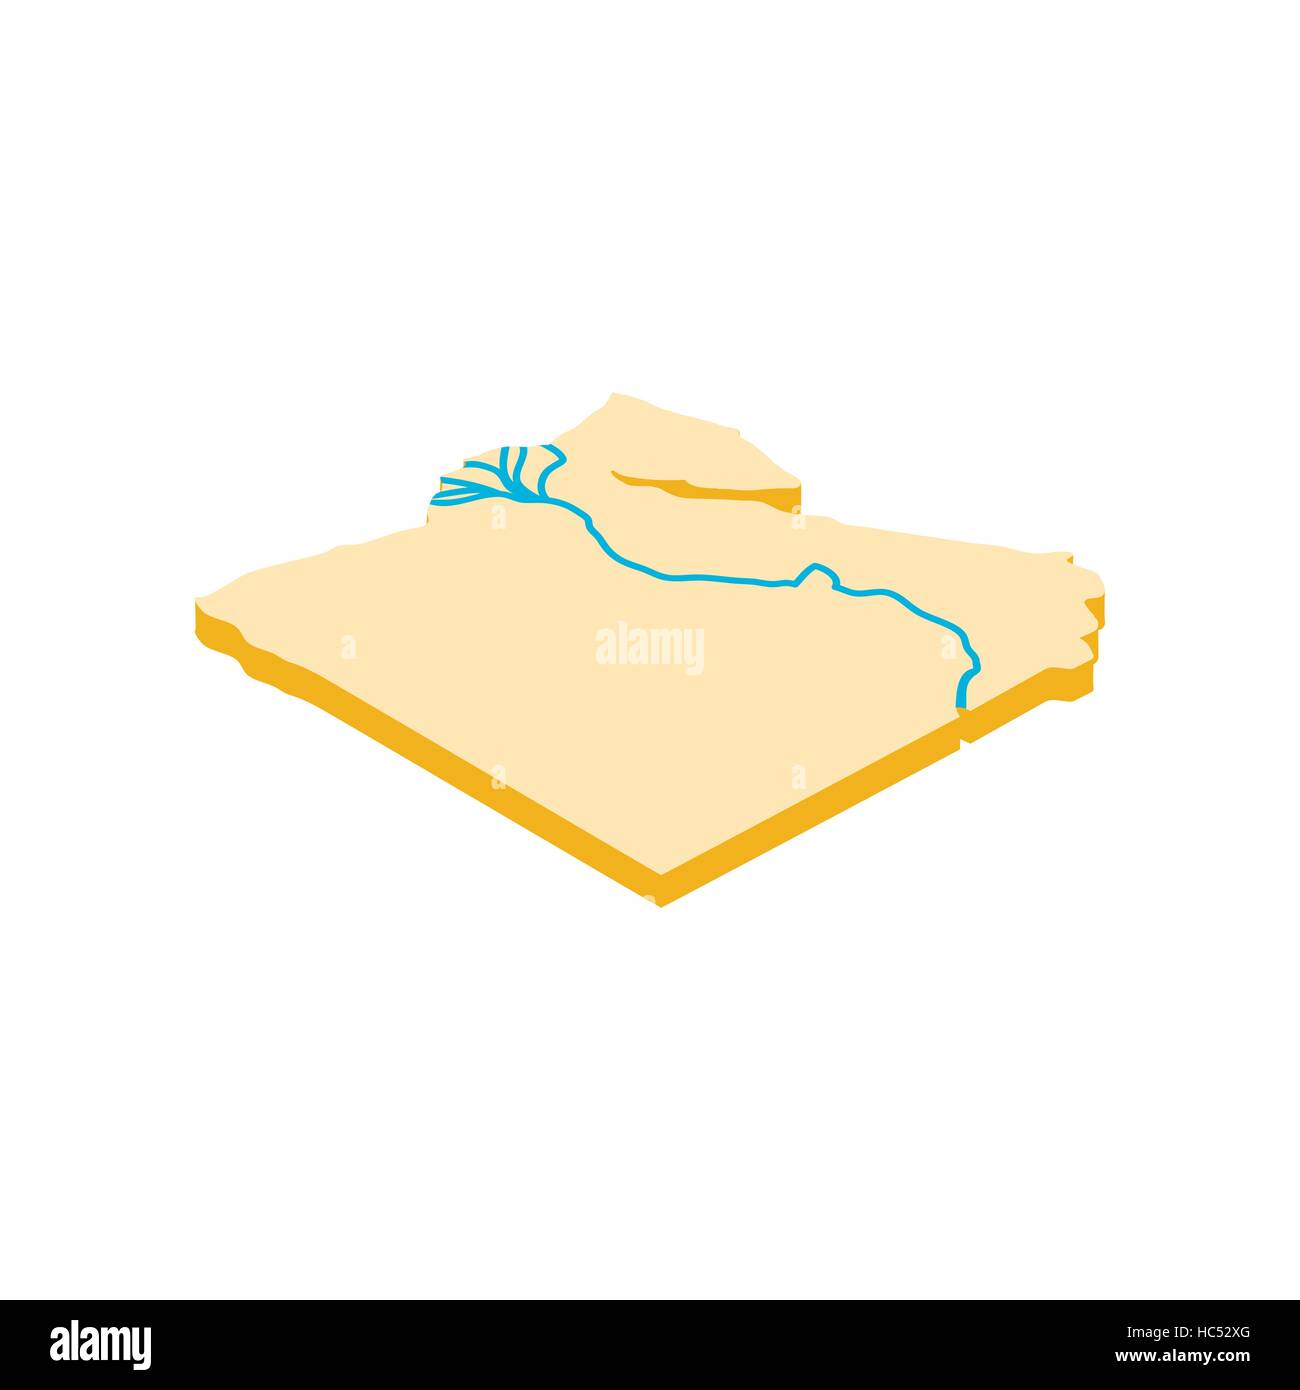 Nile river icon, isometric 3d style Stock Vector